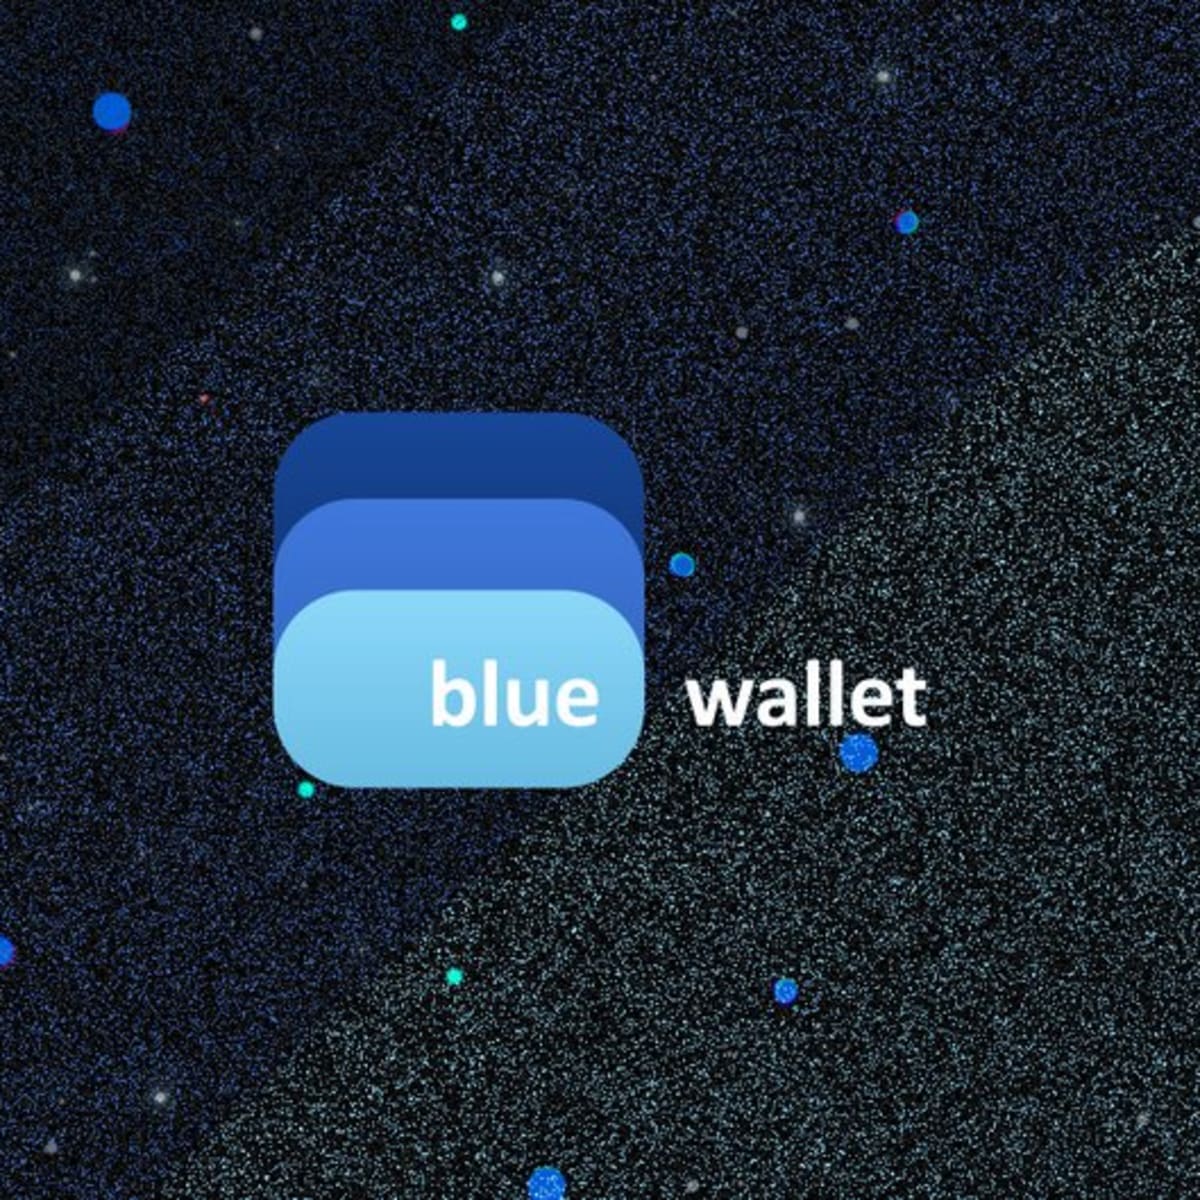 BlueWallet disconnects from LndHub